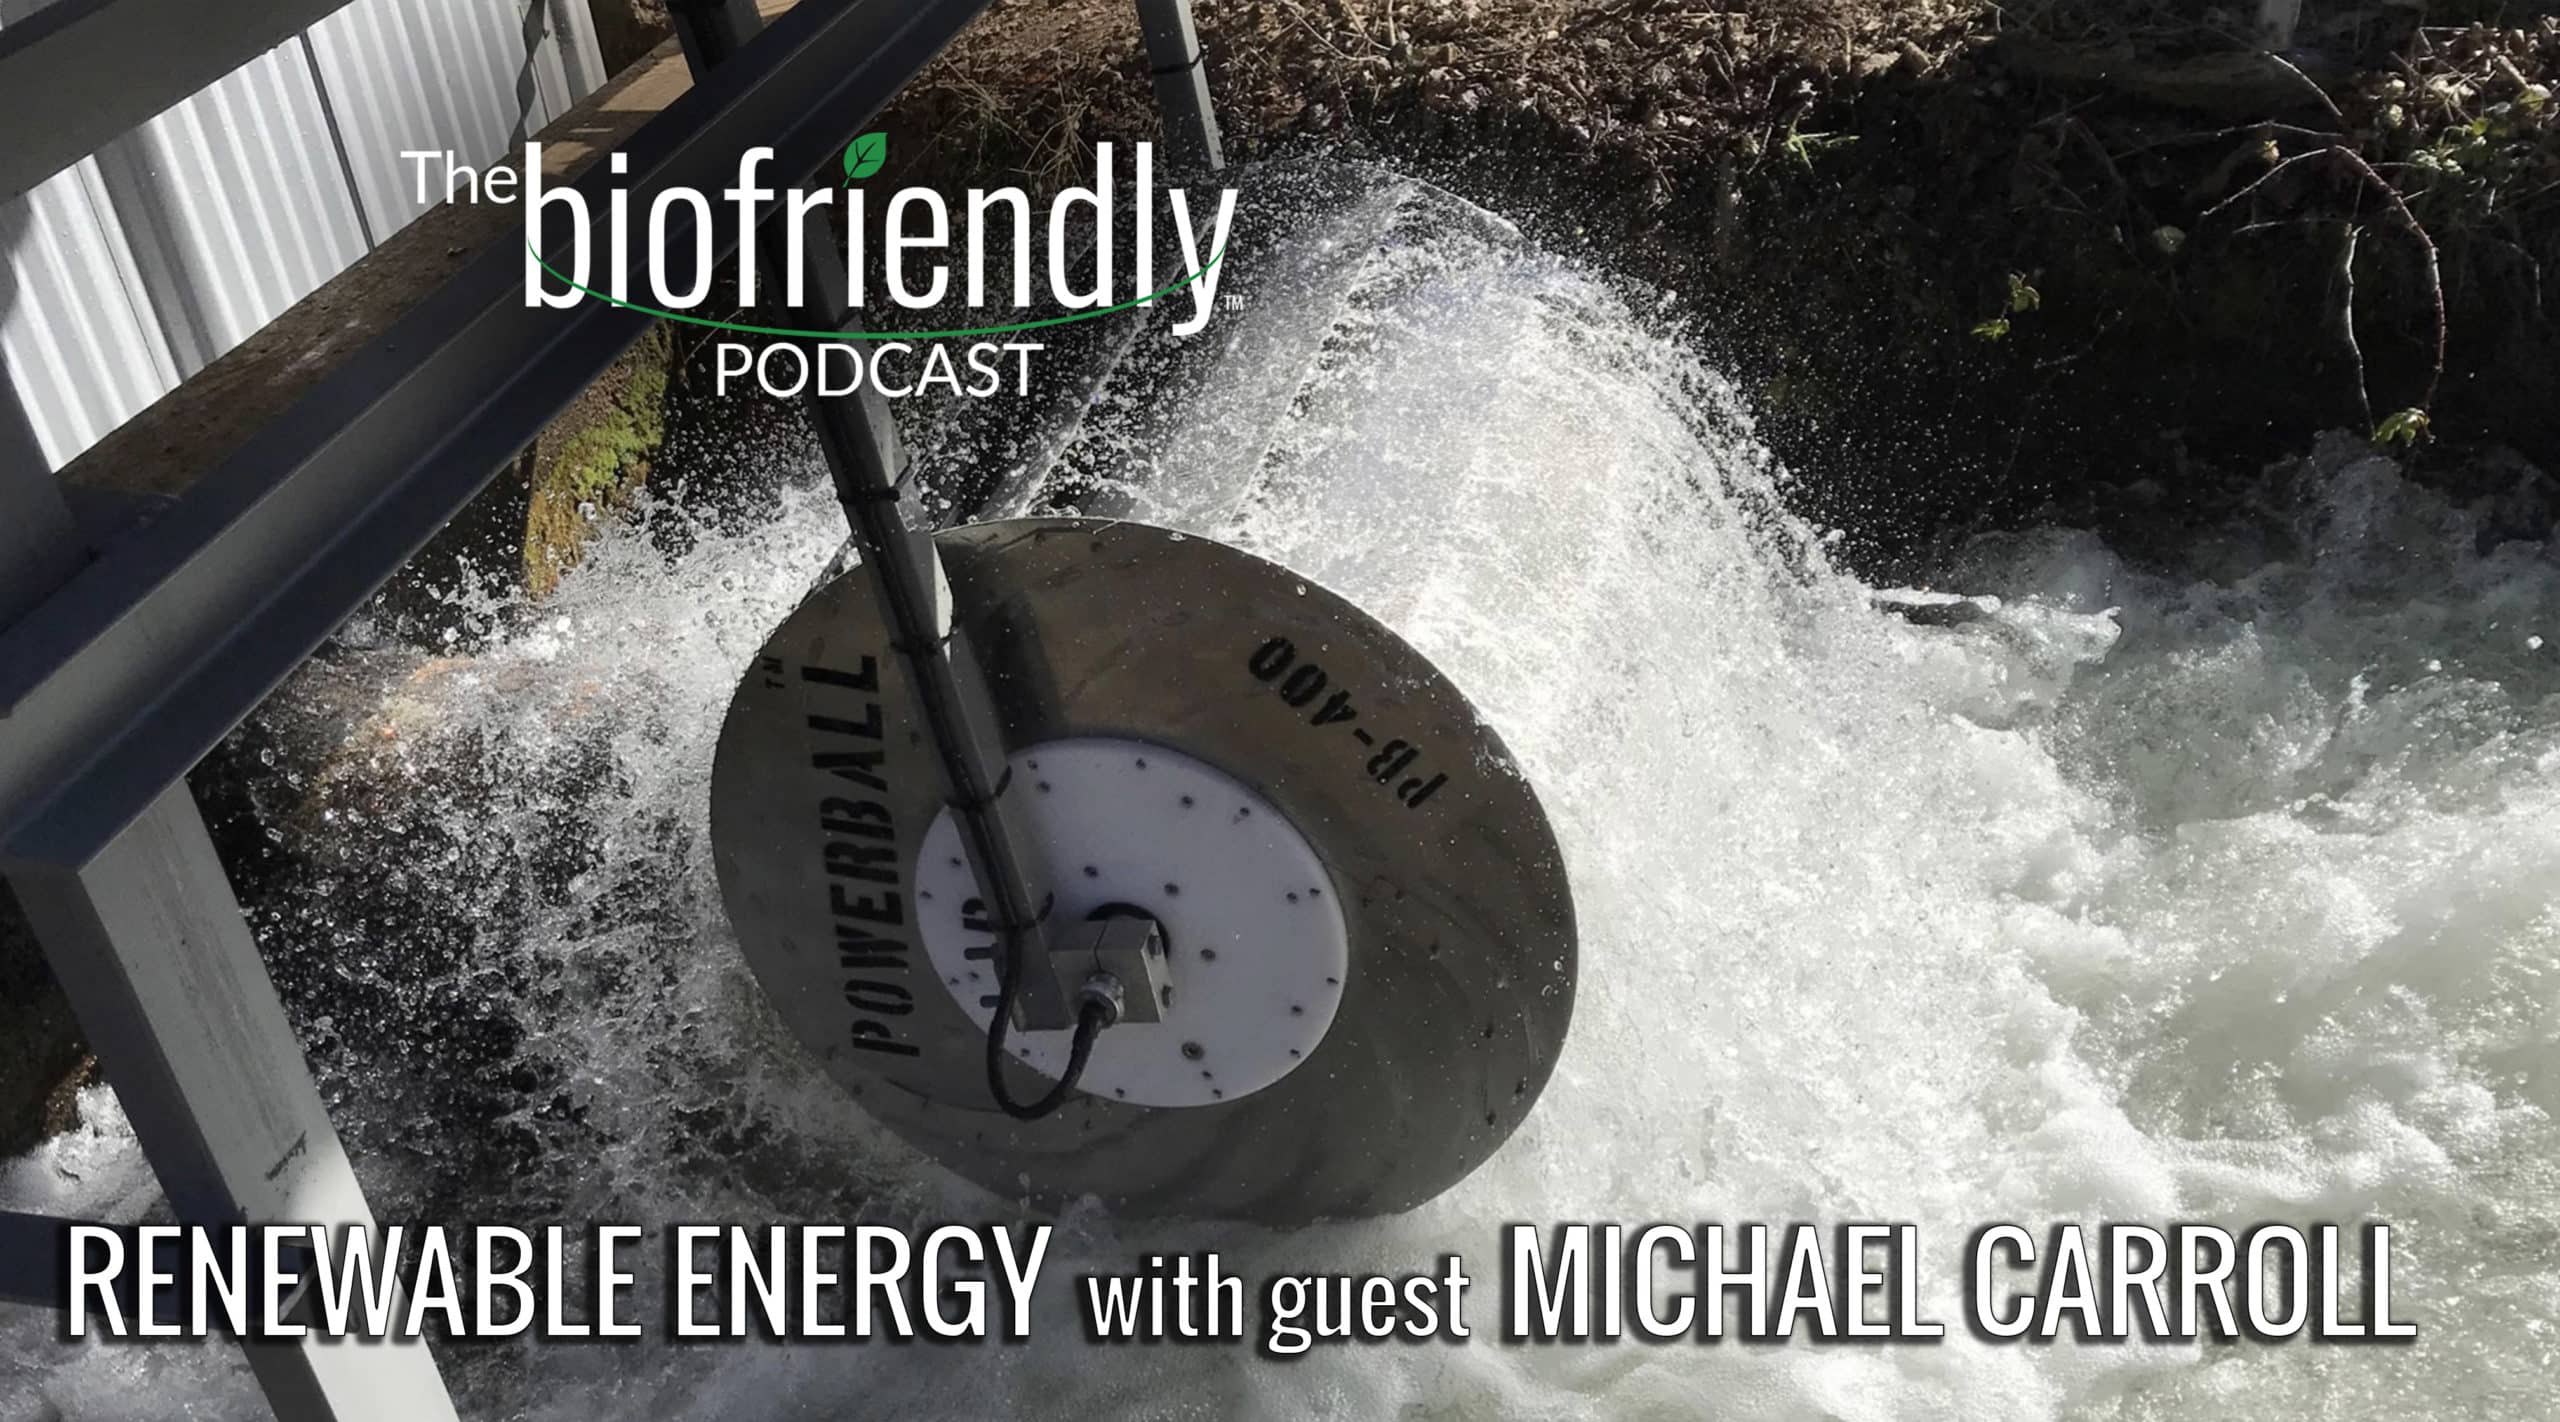 The Biofriendly Podcast - Episode 59 - Renewable Energy with guest Michael Carroll